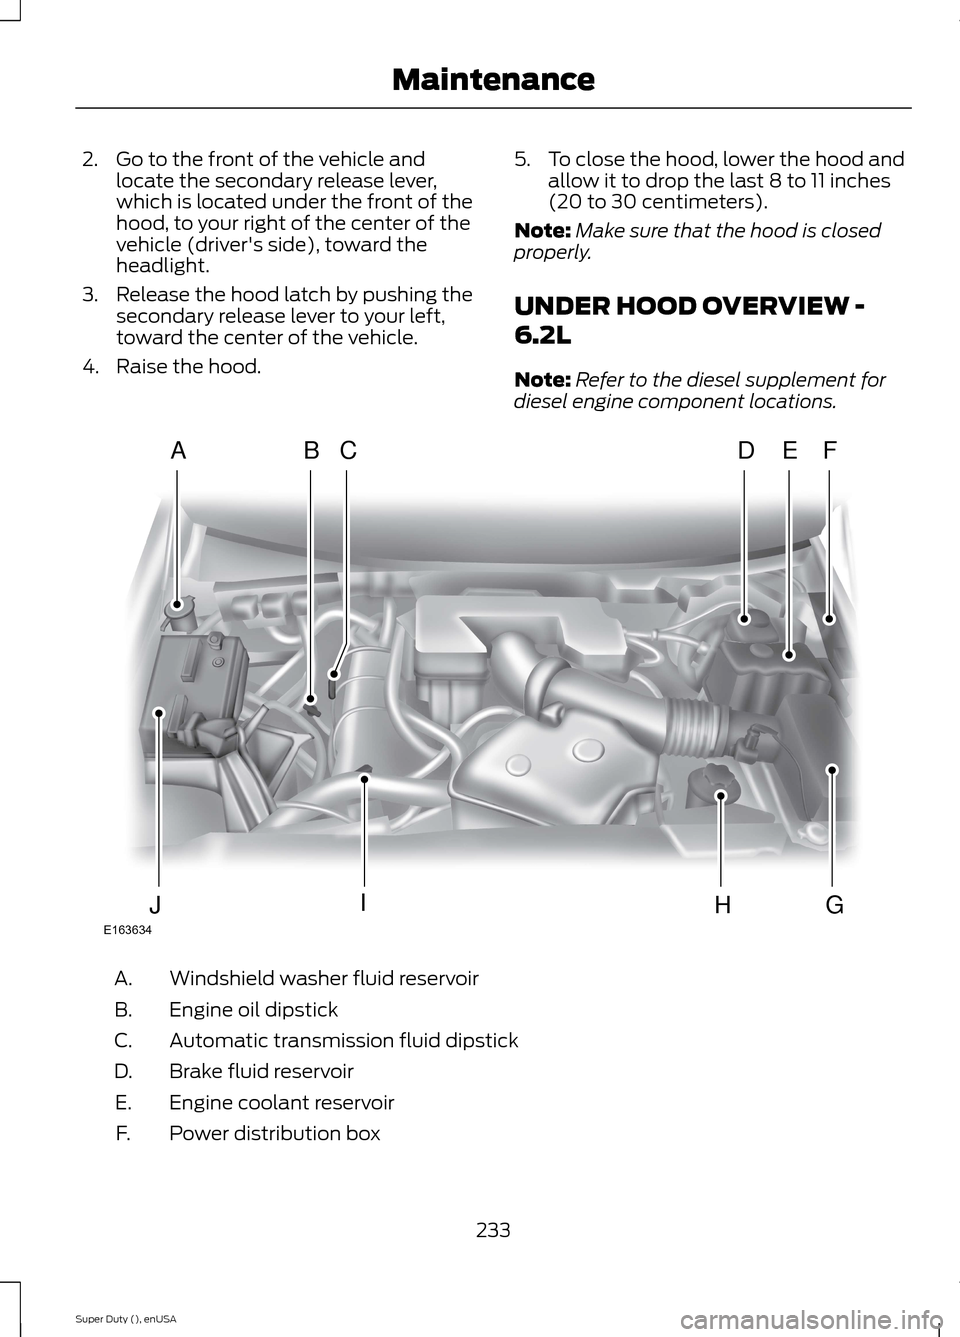 FORD SUPER DUTY 2015 3.G Owners Manual 2.Go to the front of the vehicle andlocate the secondary release lever,which is located under the front of thehood, to your right of the center of thevehicle (drivers side), toward theheadlight.
3.Re